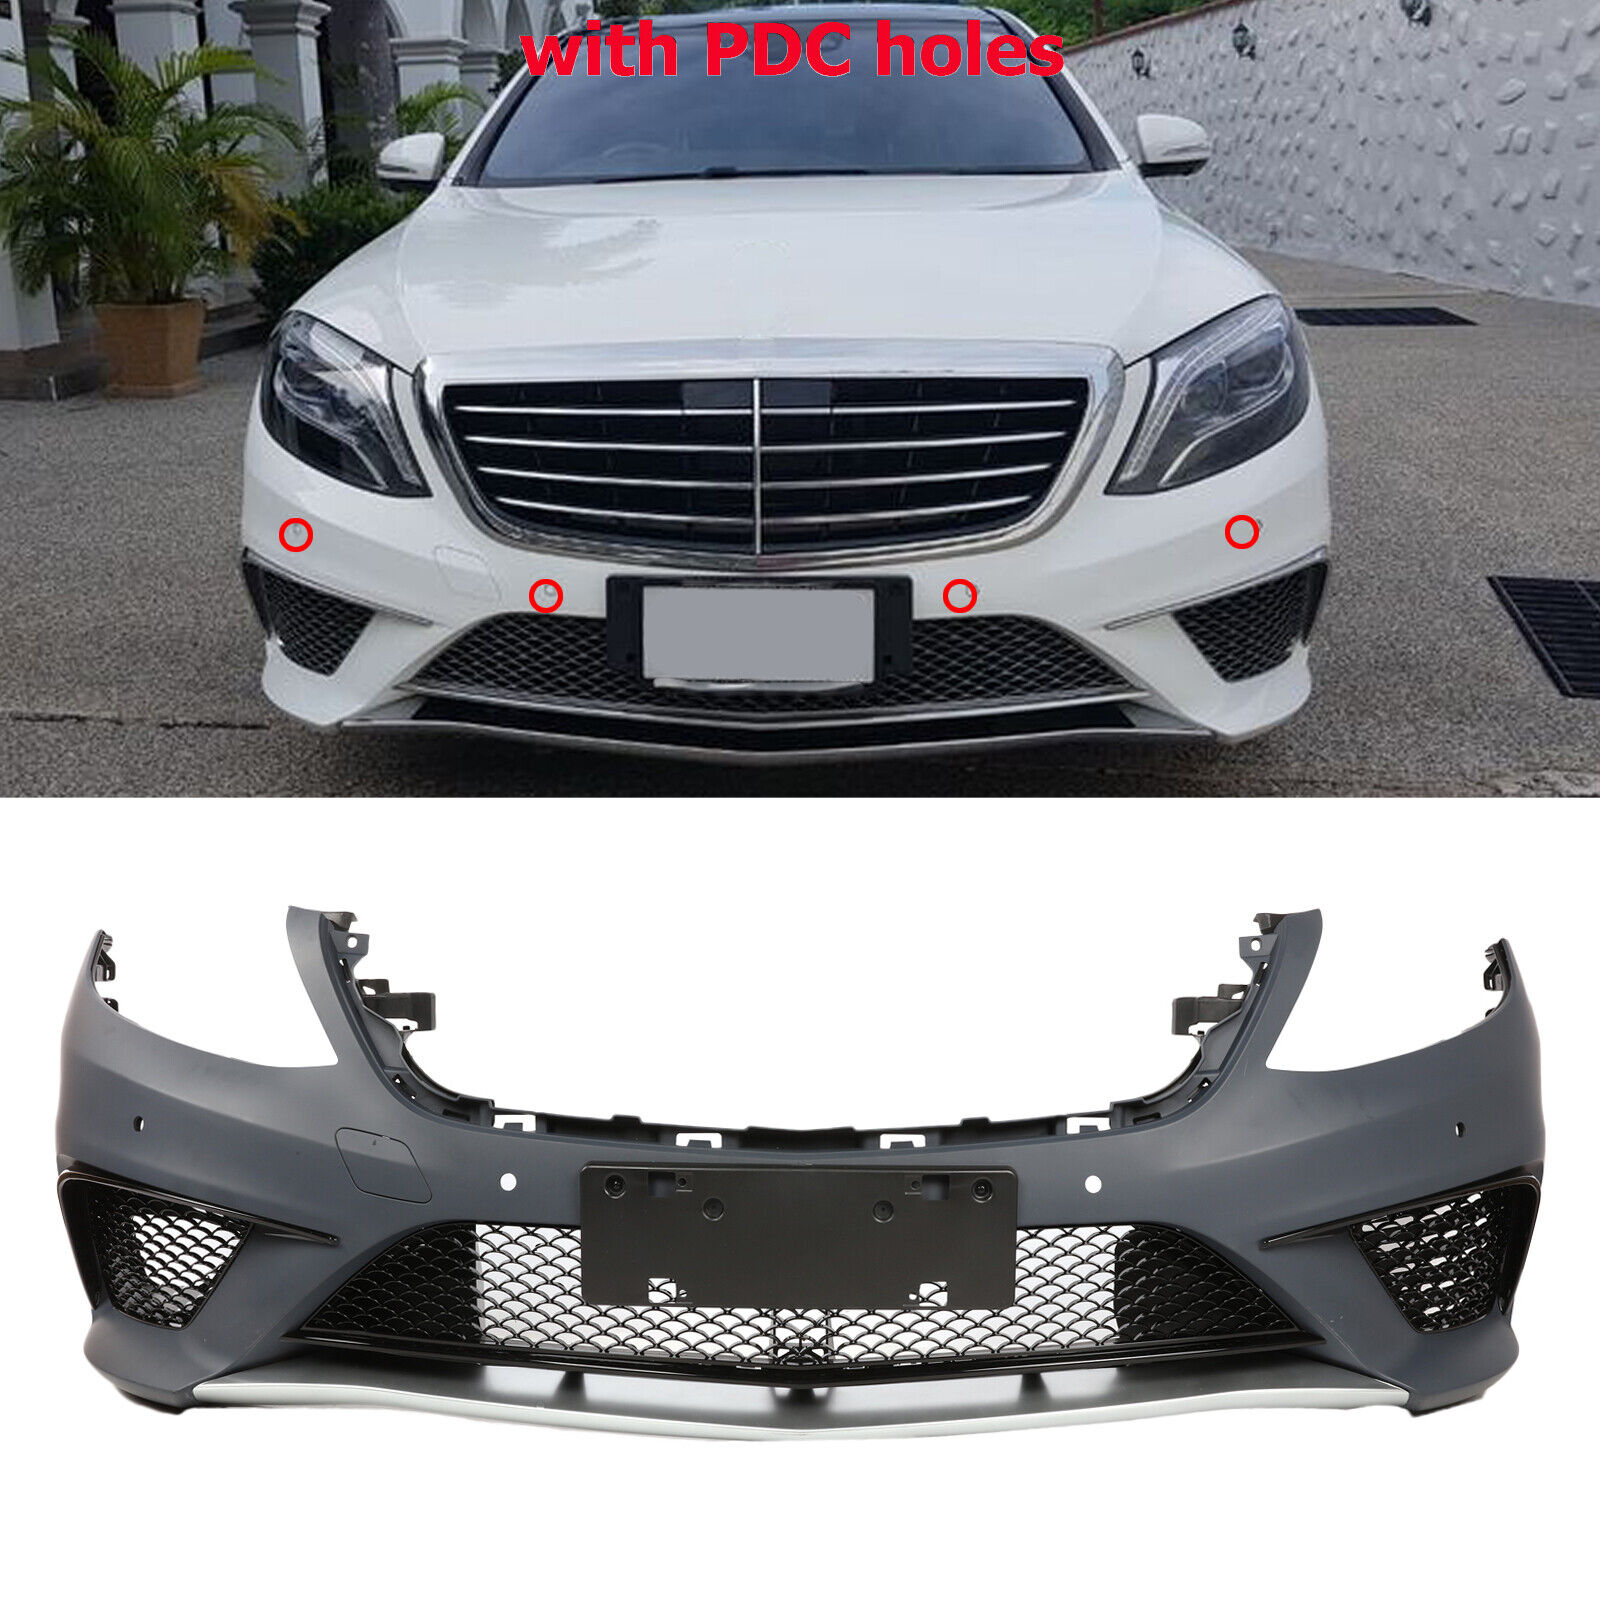 Fit Mercedes Benz S Class W222 14-17 S63 AMG Style Front Bumper w/ PDC Molding